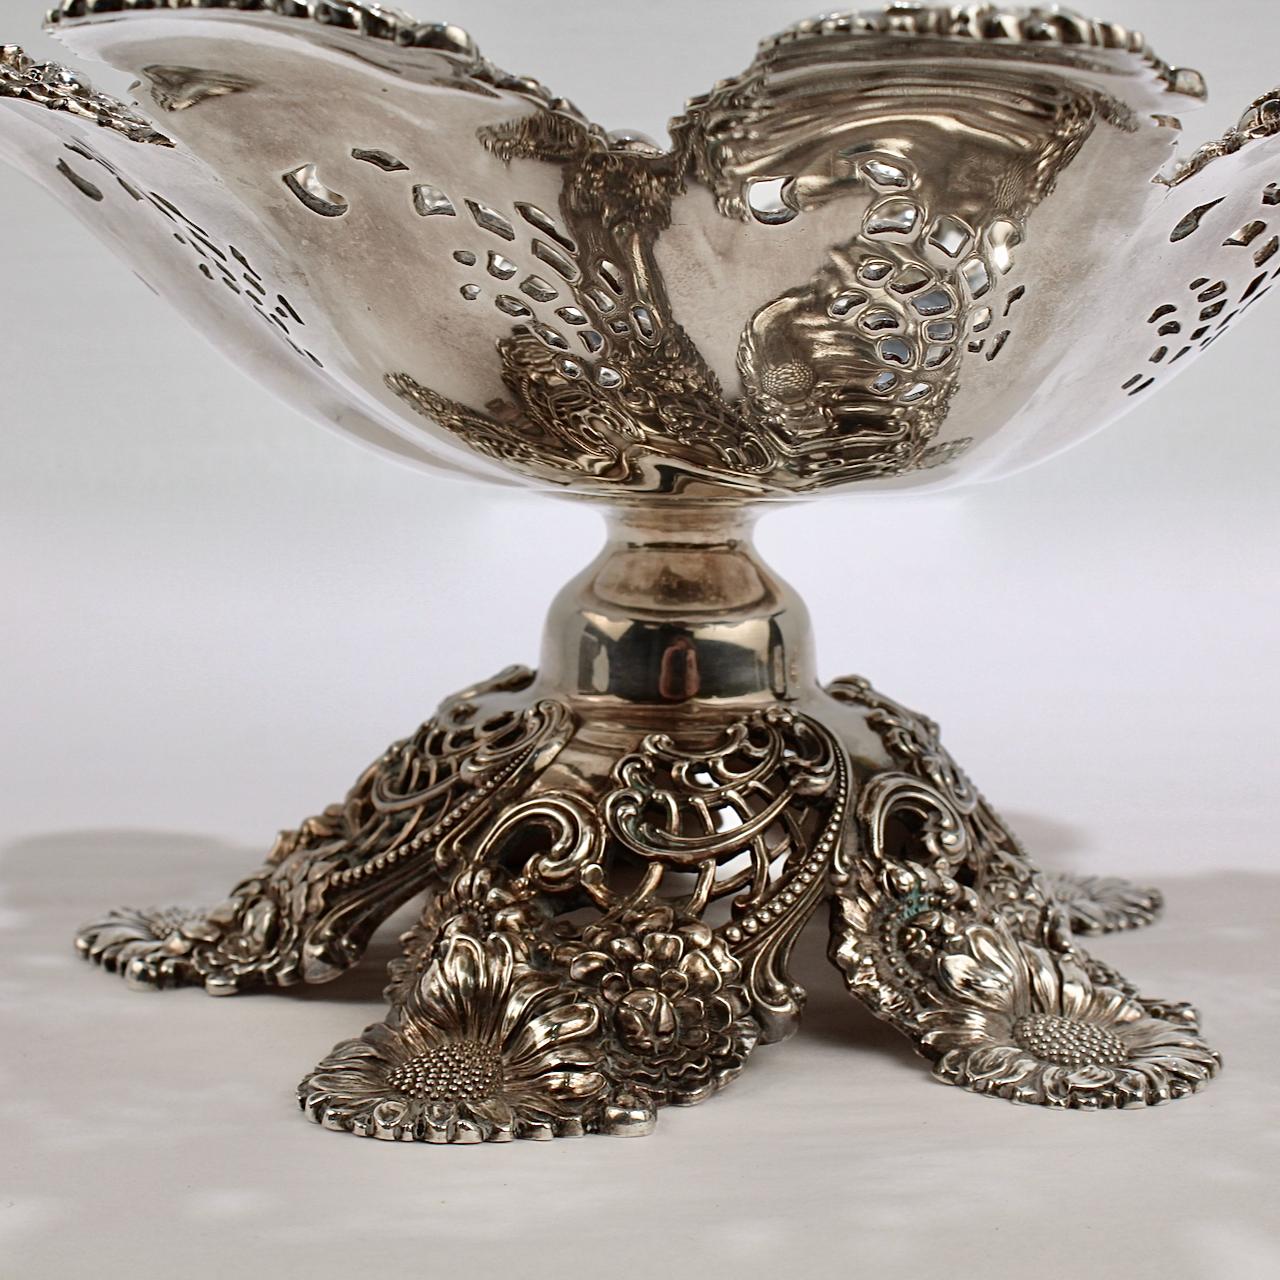 American Art Nouveau Sterling Silver Repoussé Footed Bowl by Dominick & Haff 3